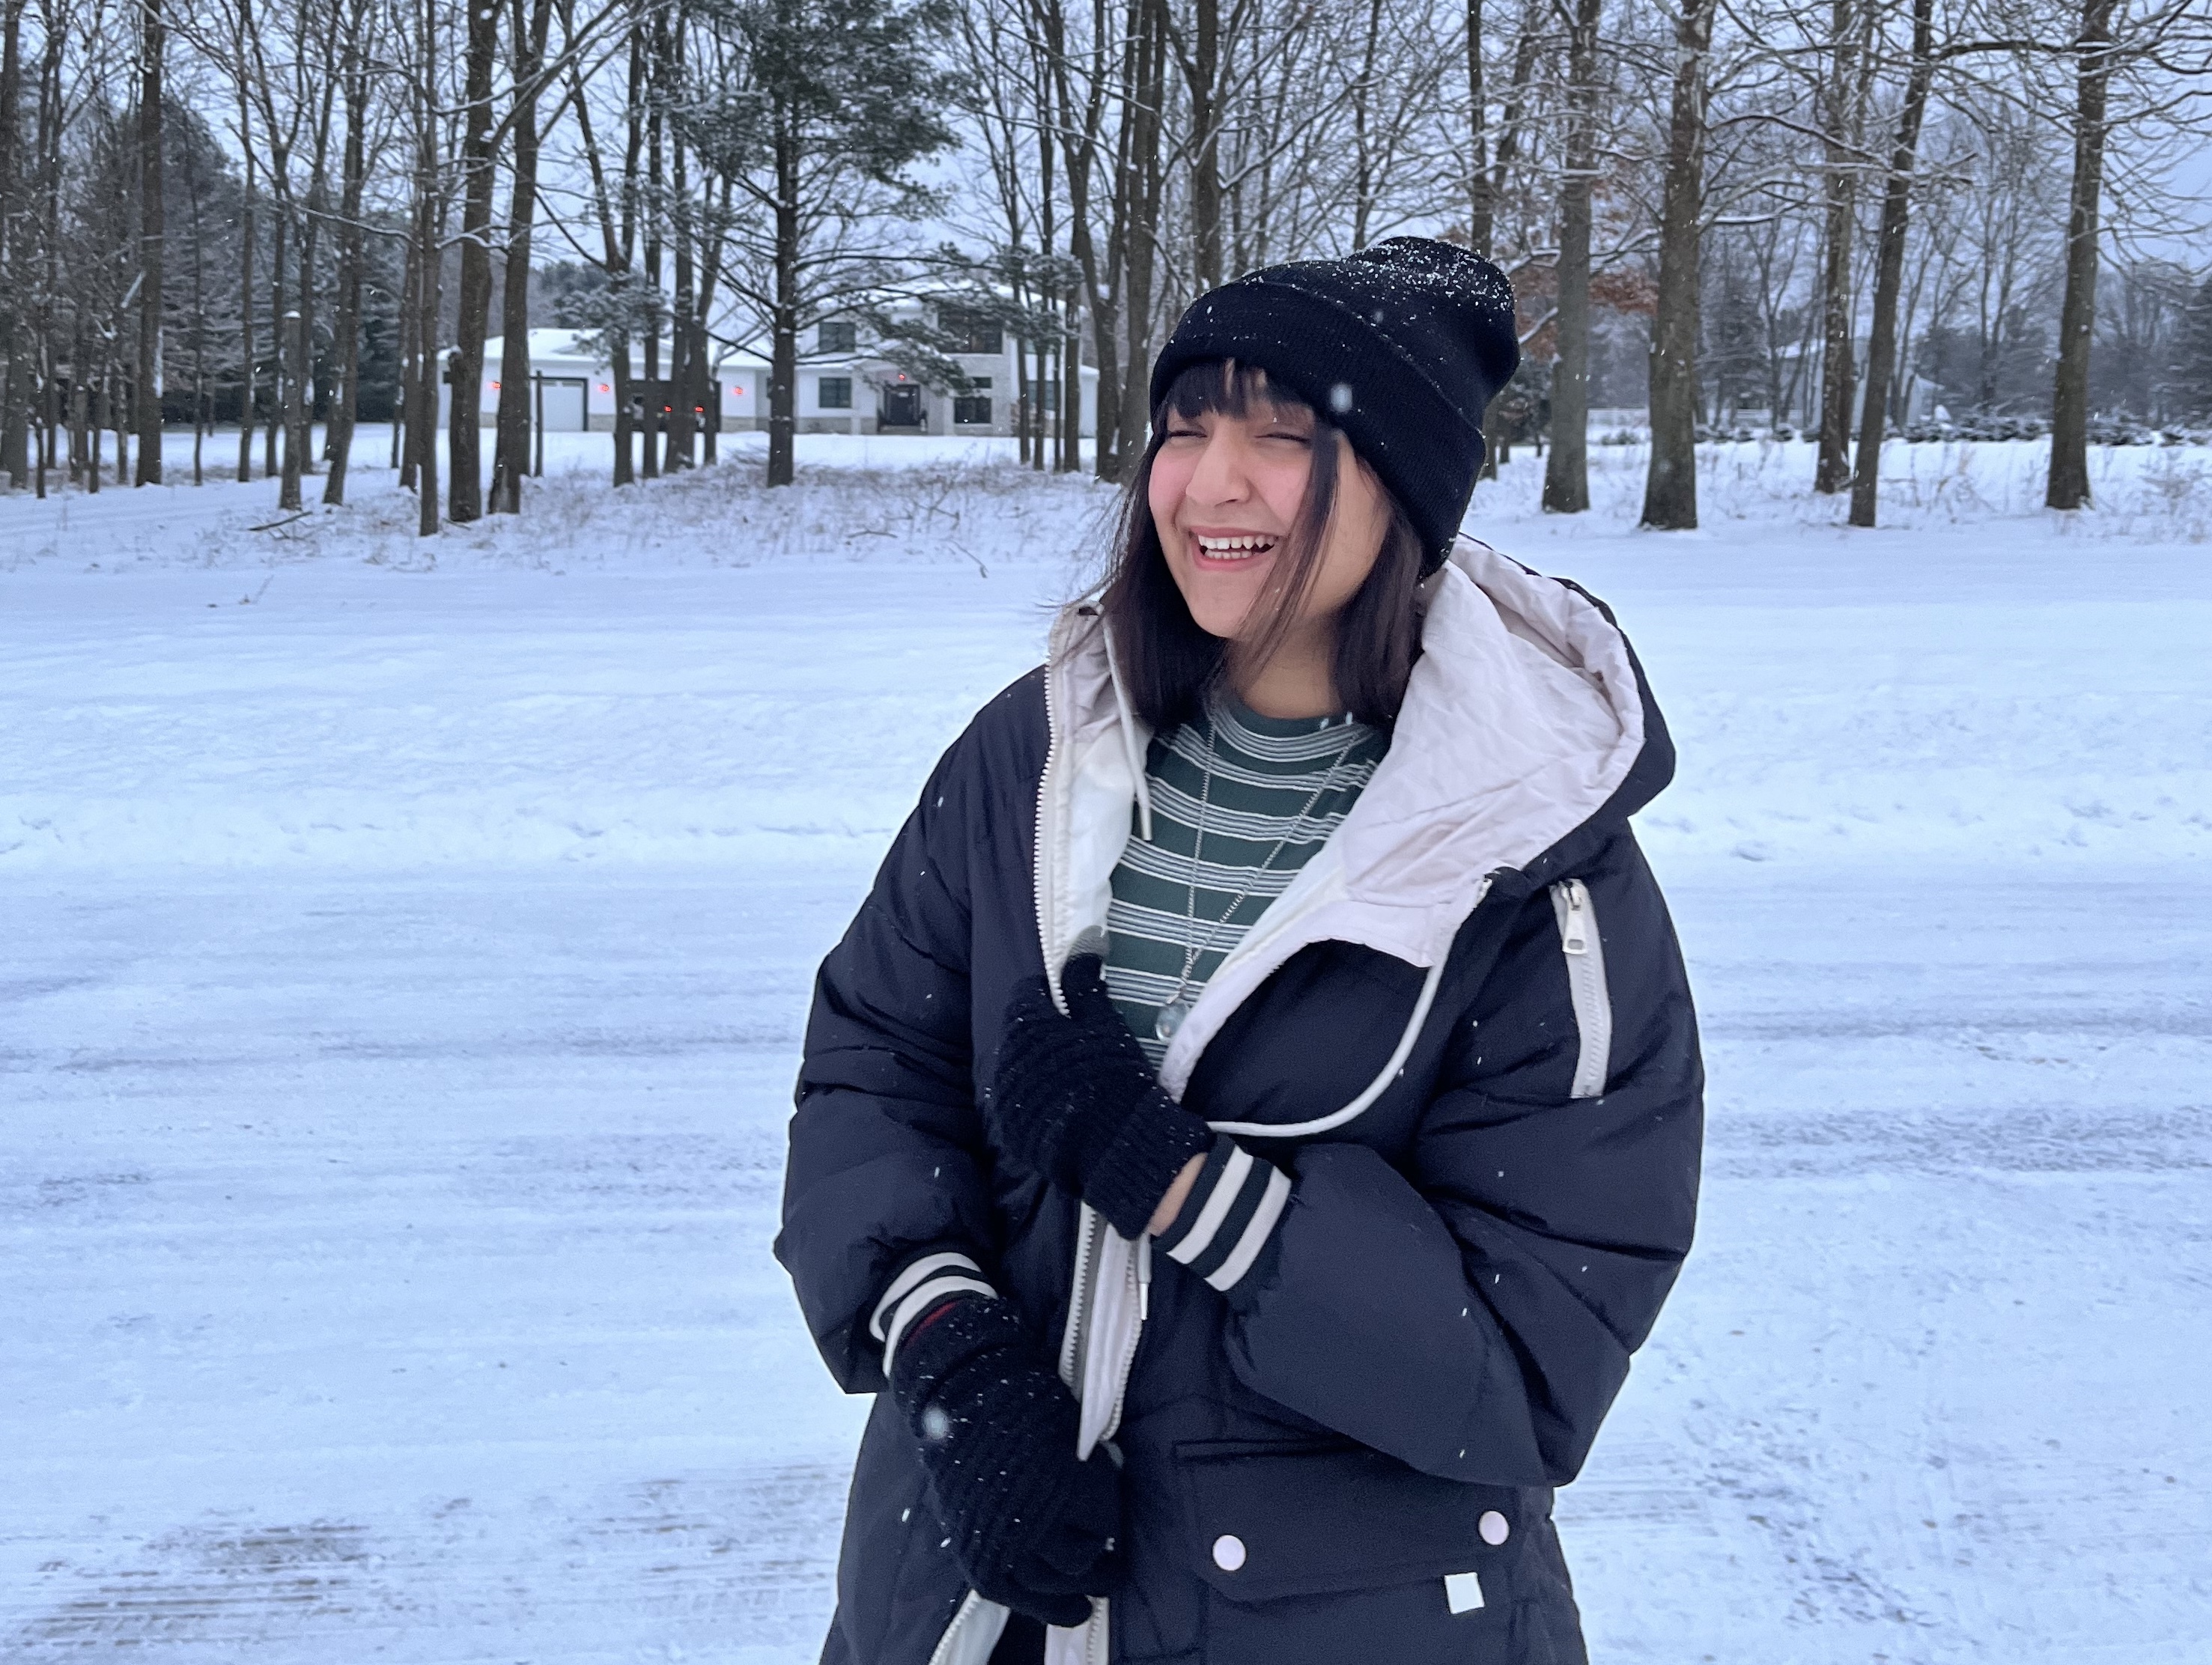 Mahnoor smiling in the snow in a winter coat, hat and gloves